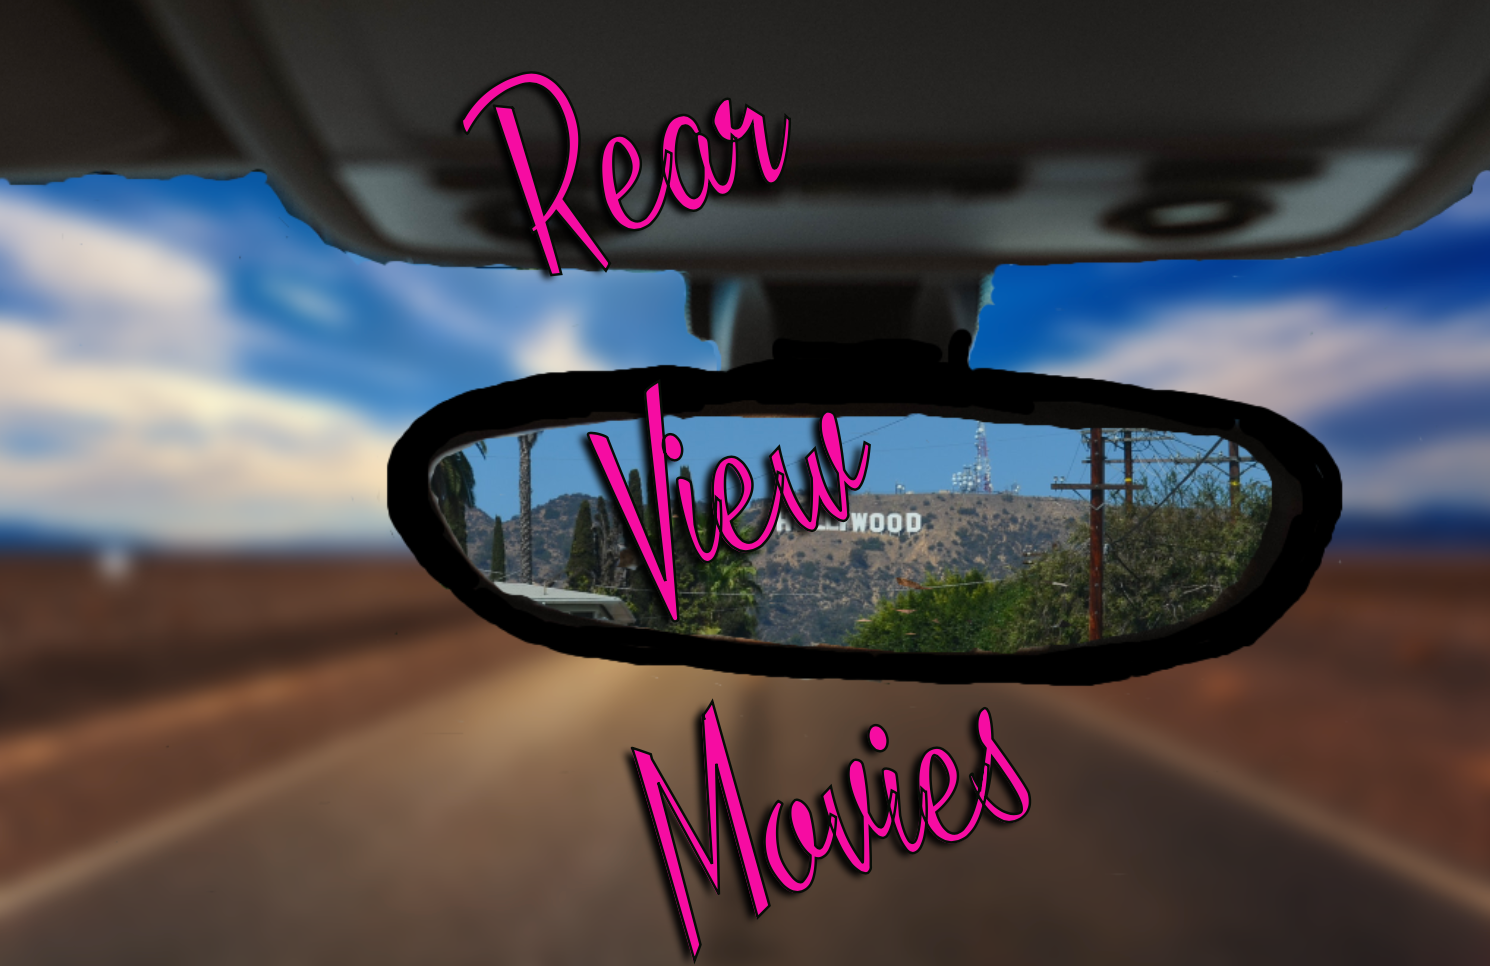 Rear View Movies